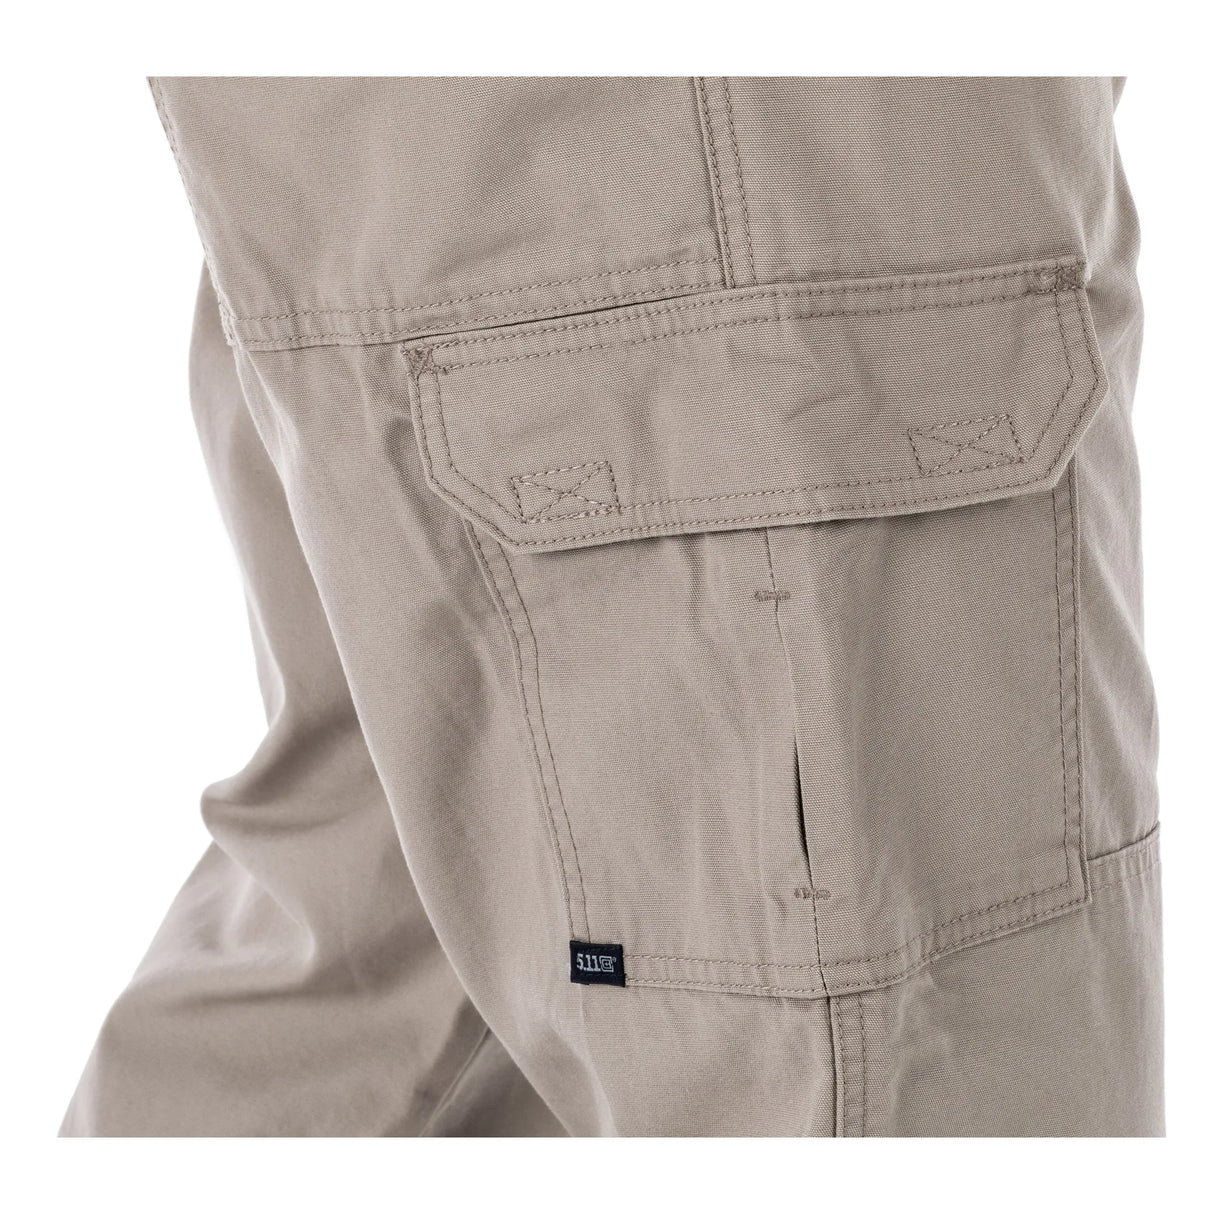 Double Seat and Knee Patch Pocket Pant: Reinforced areas for durability and protection.